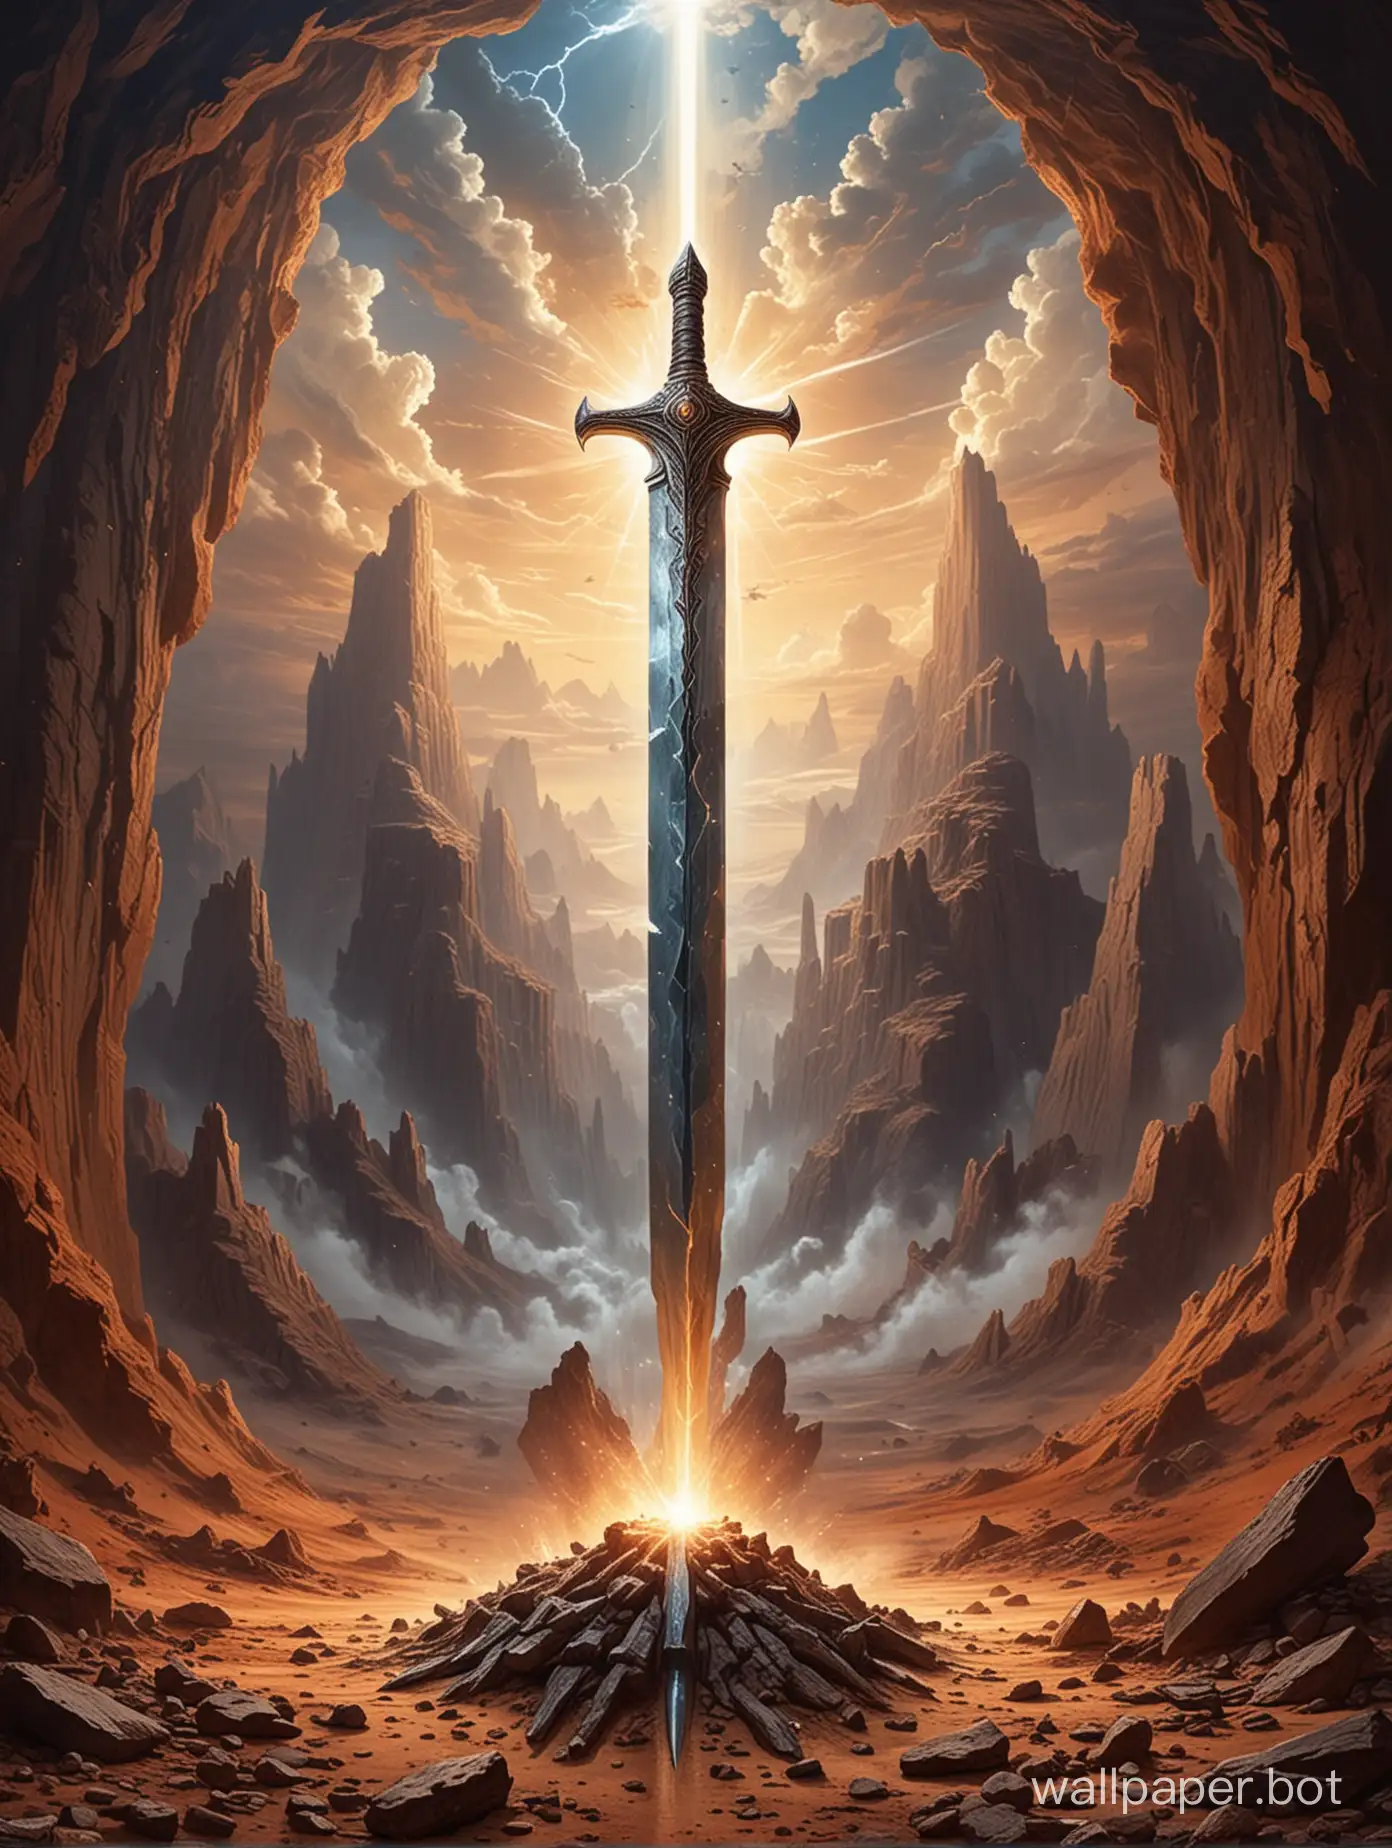 enormous god sword thrust into the crust of the eart which is a remnant from the past